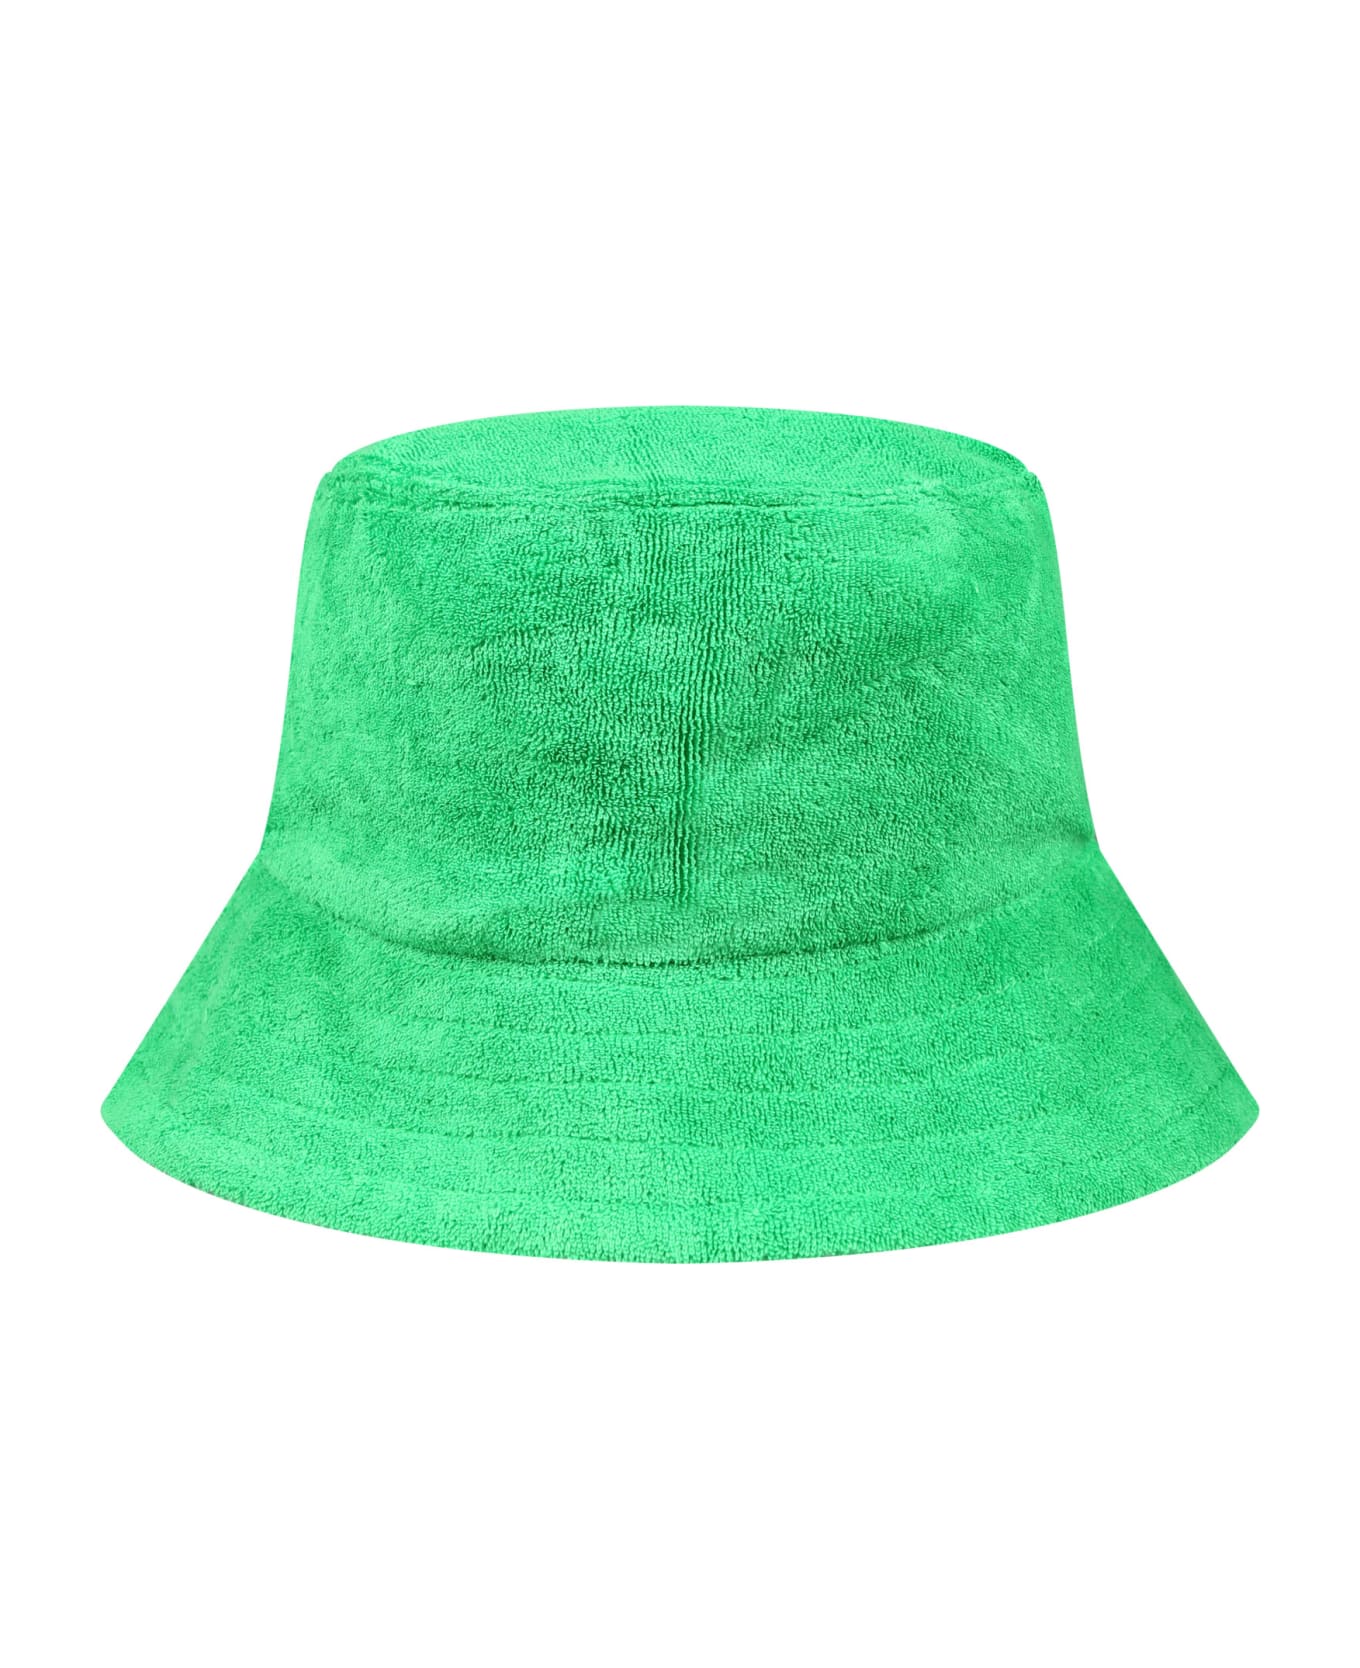 Molo Green Cloche For Kids - Green アクセサリー＆ギフト